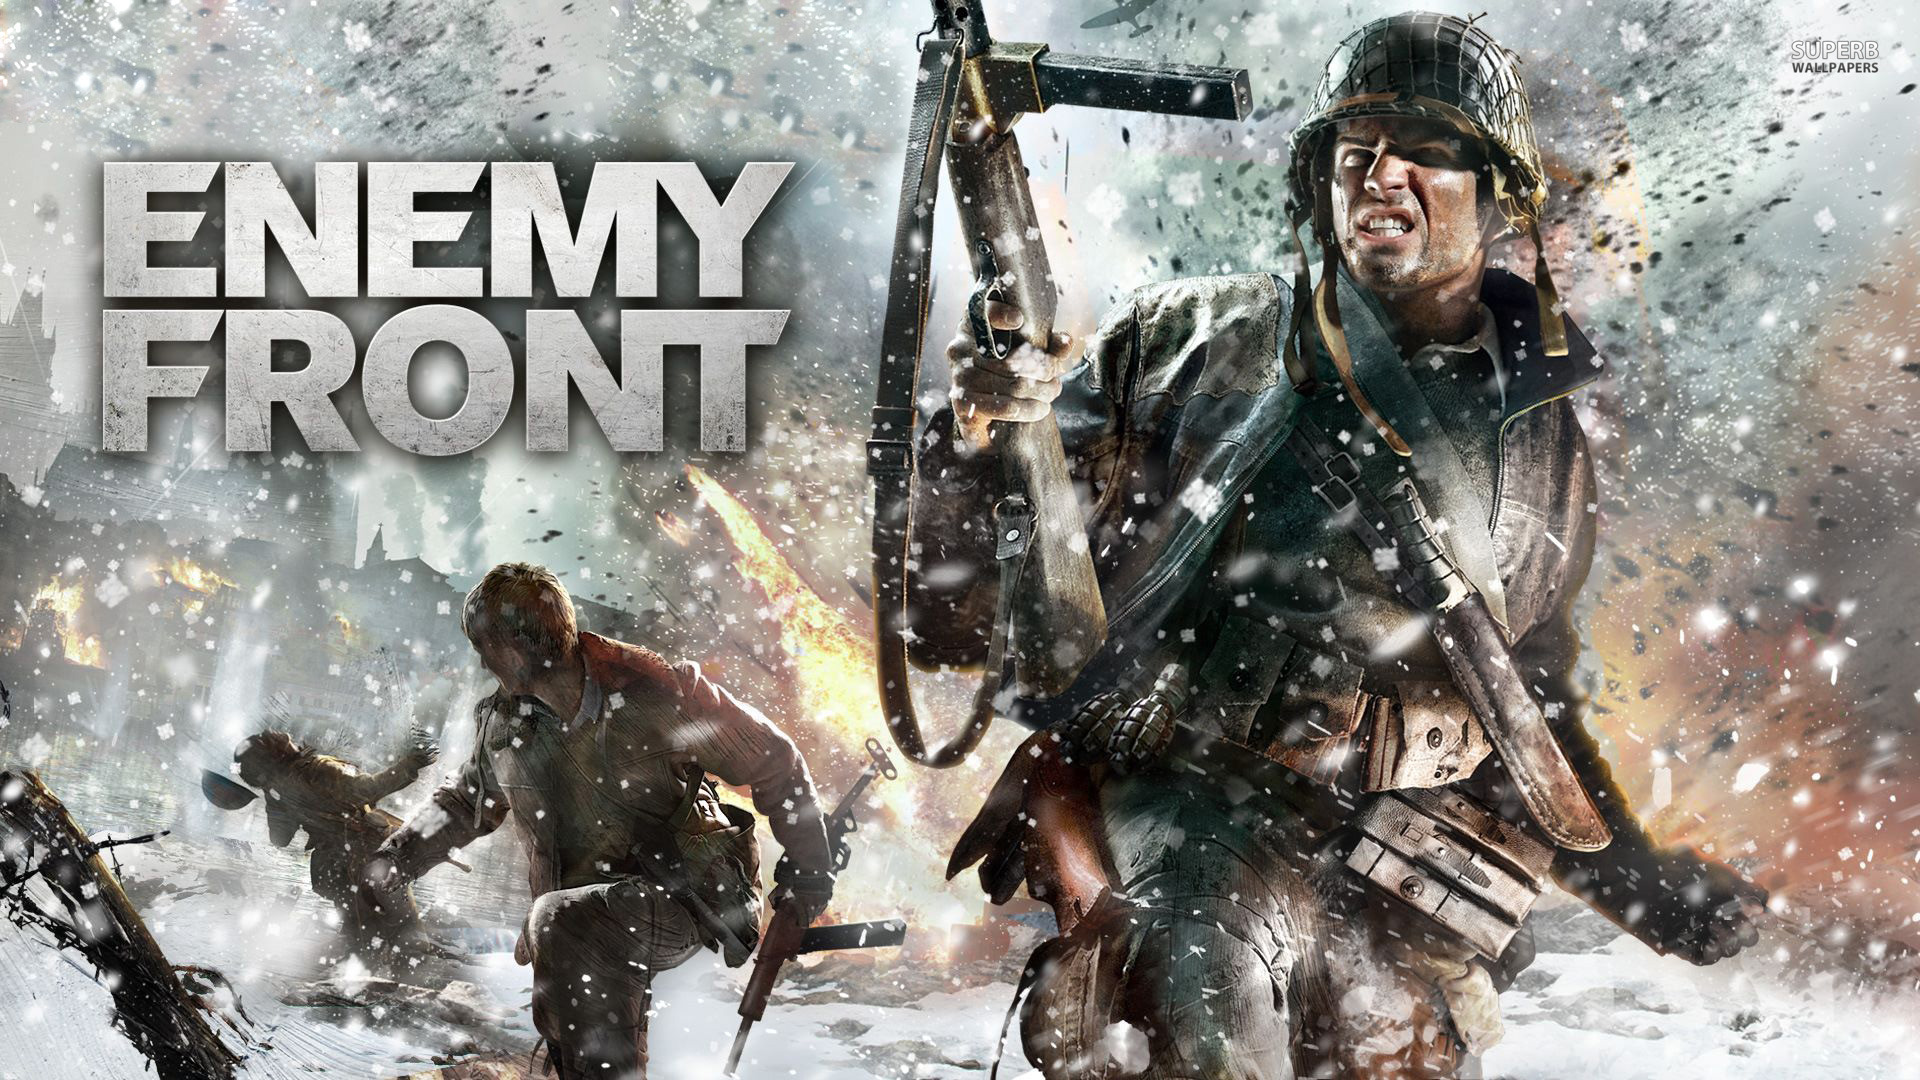 enemy front pc game download